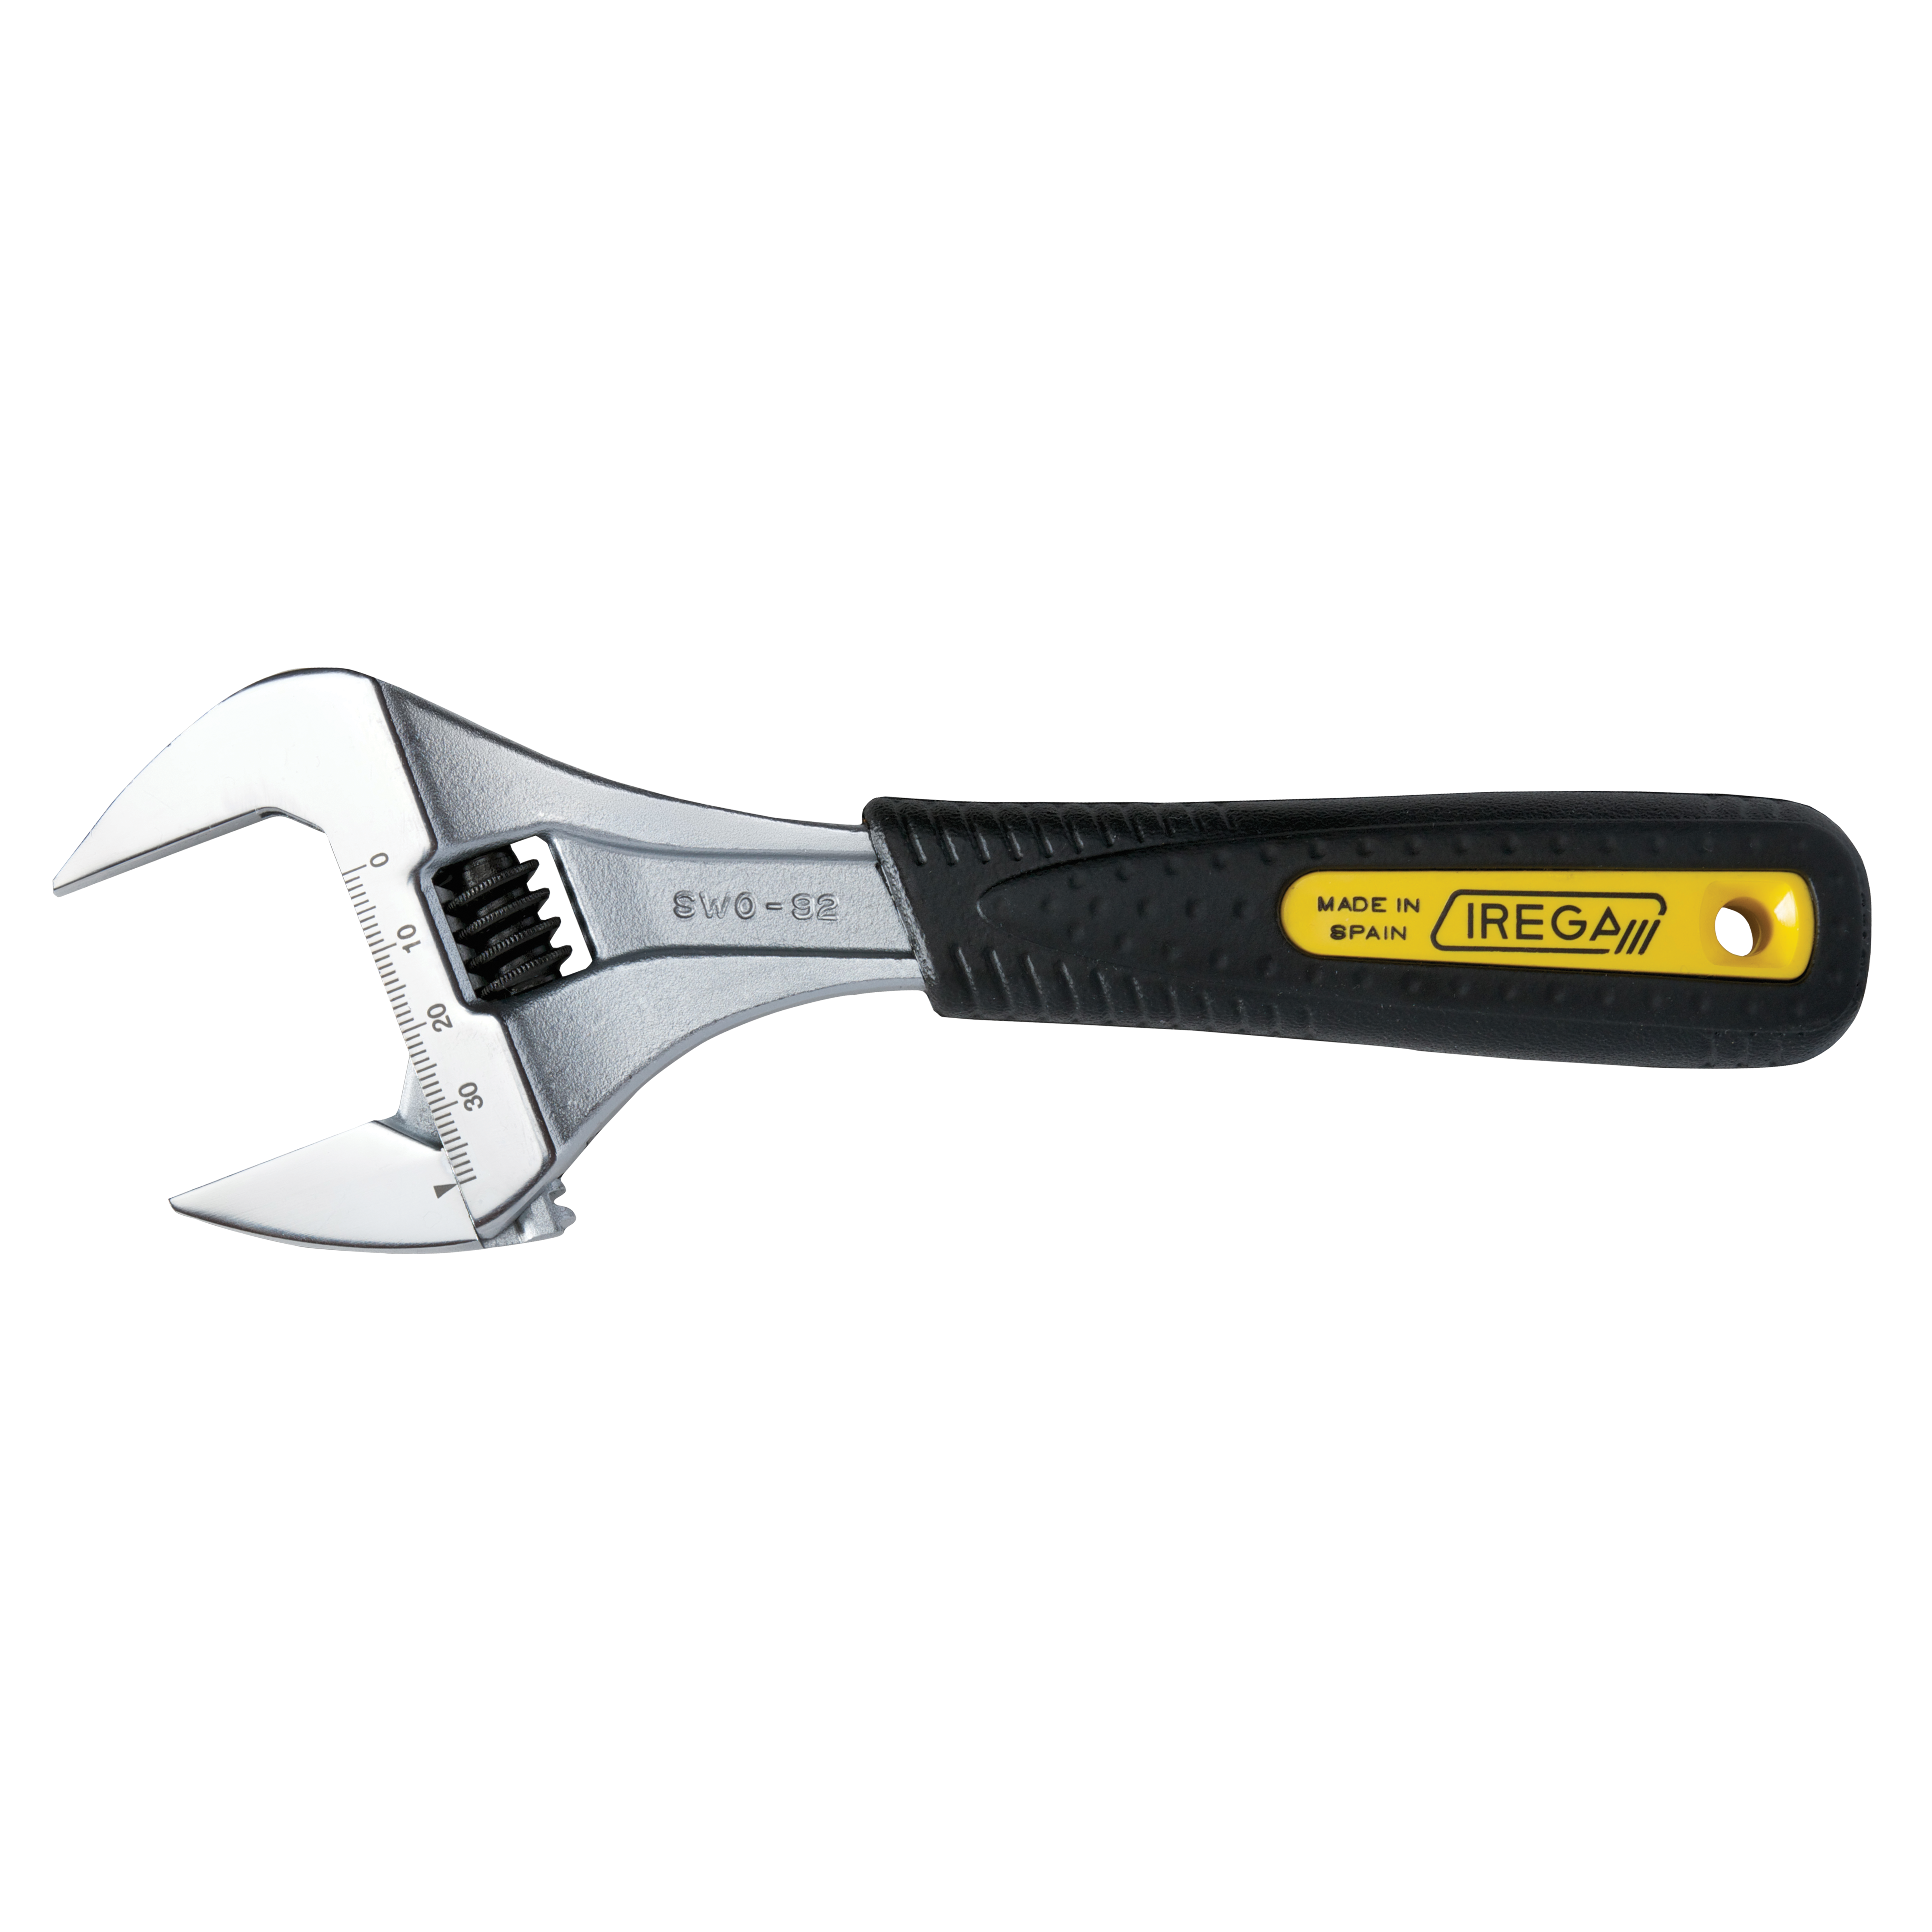 #SWO92 200mm ADJUSTABLE WRENCH - 39mm CAPACITY